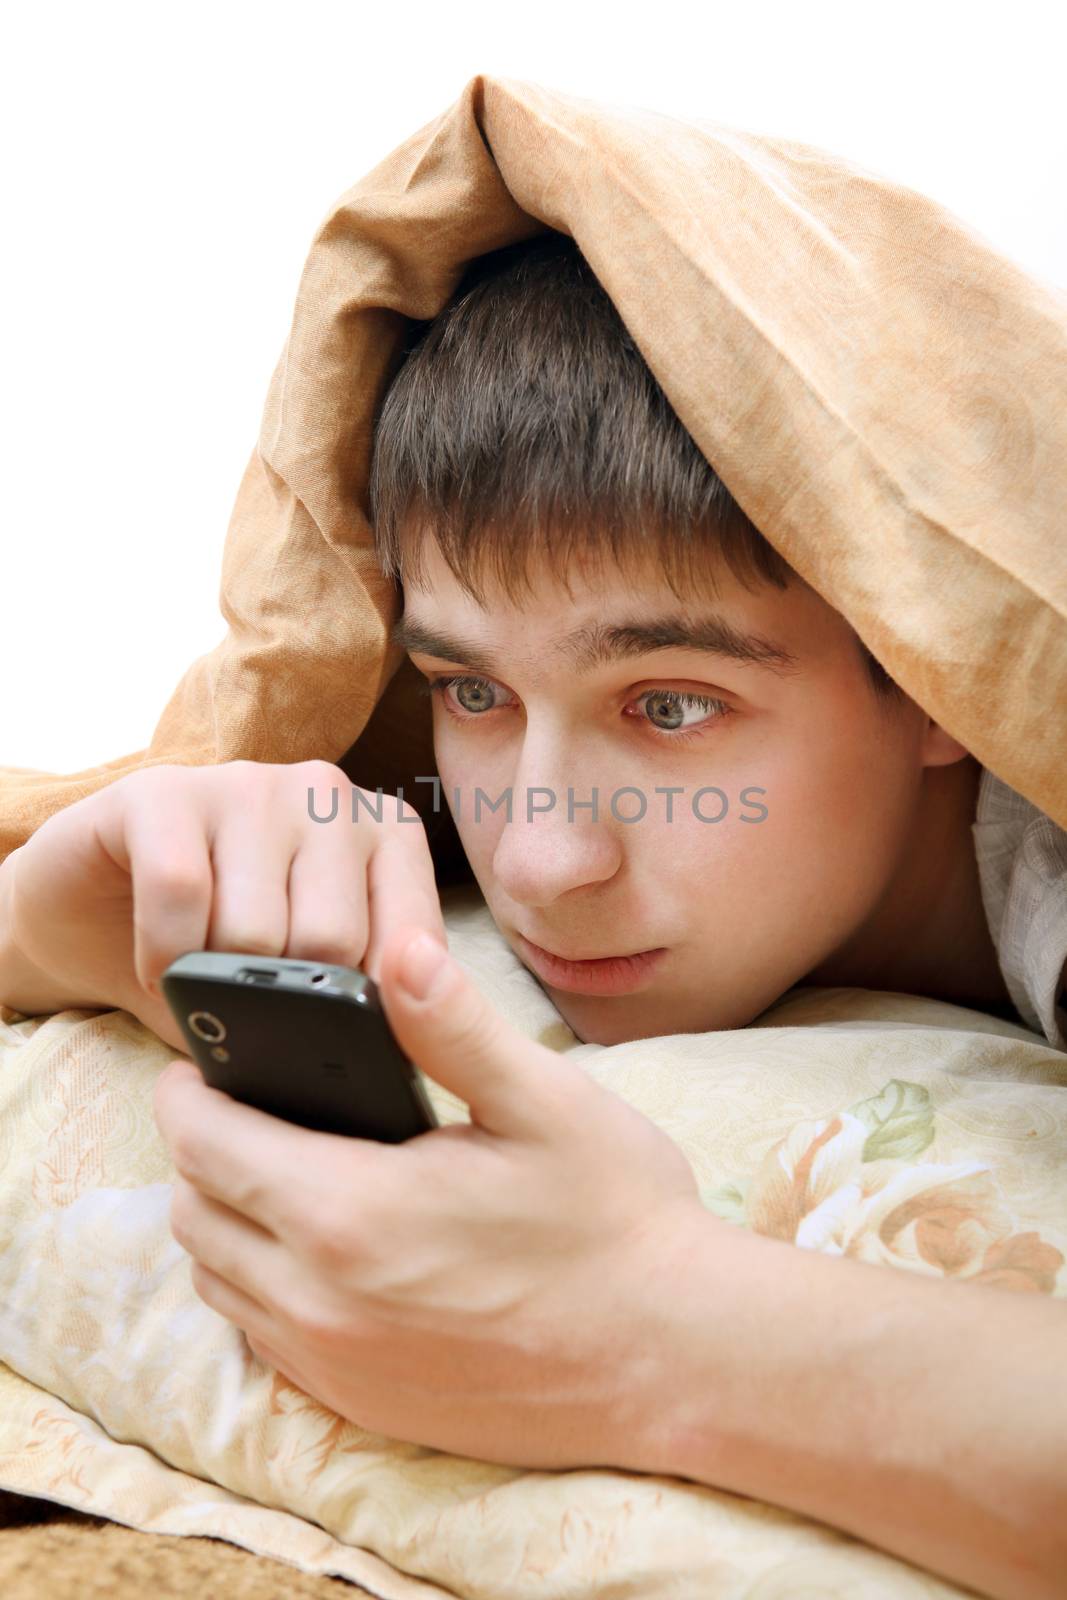 Teenager with Cellphone under Blanket at the Home